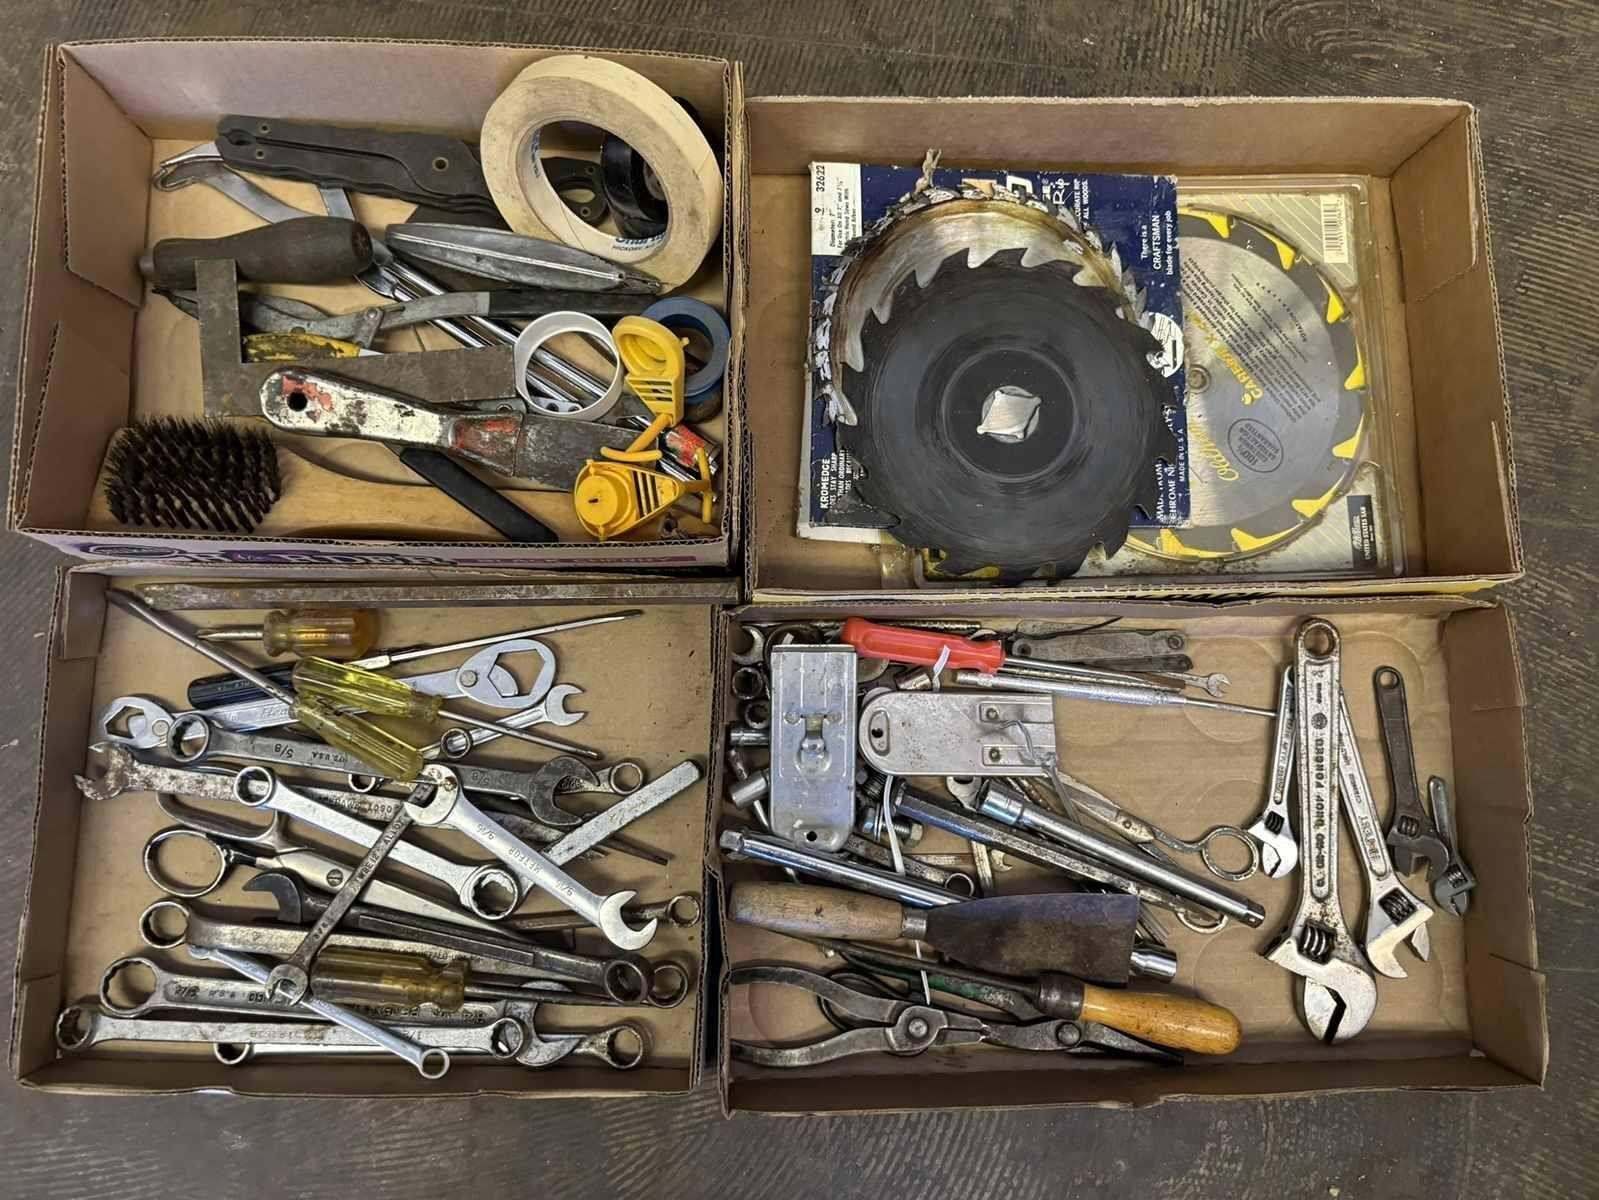 Misc Tools (Wrenches, Saw Blades, Drivers)